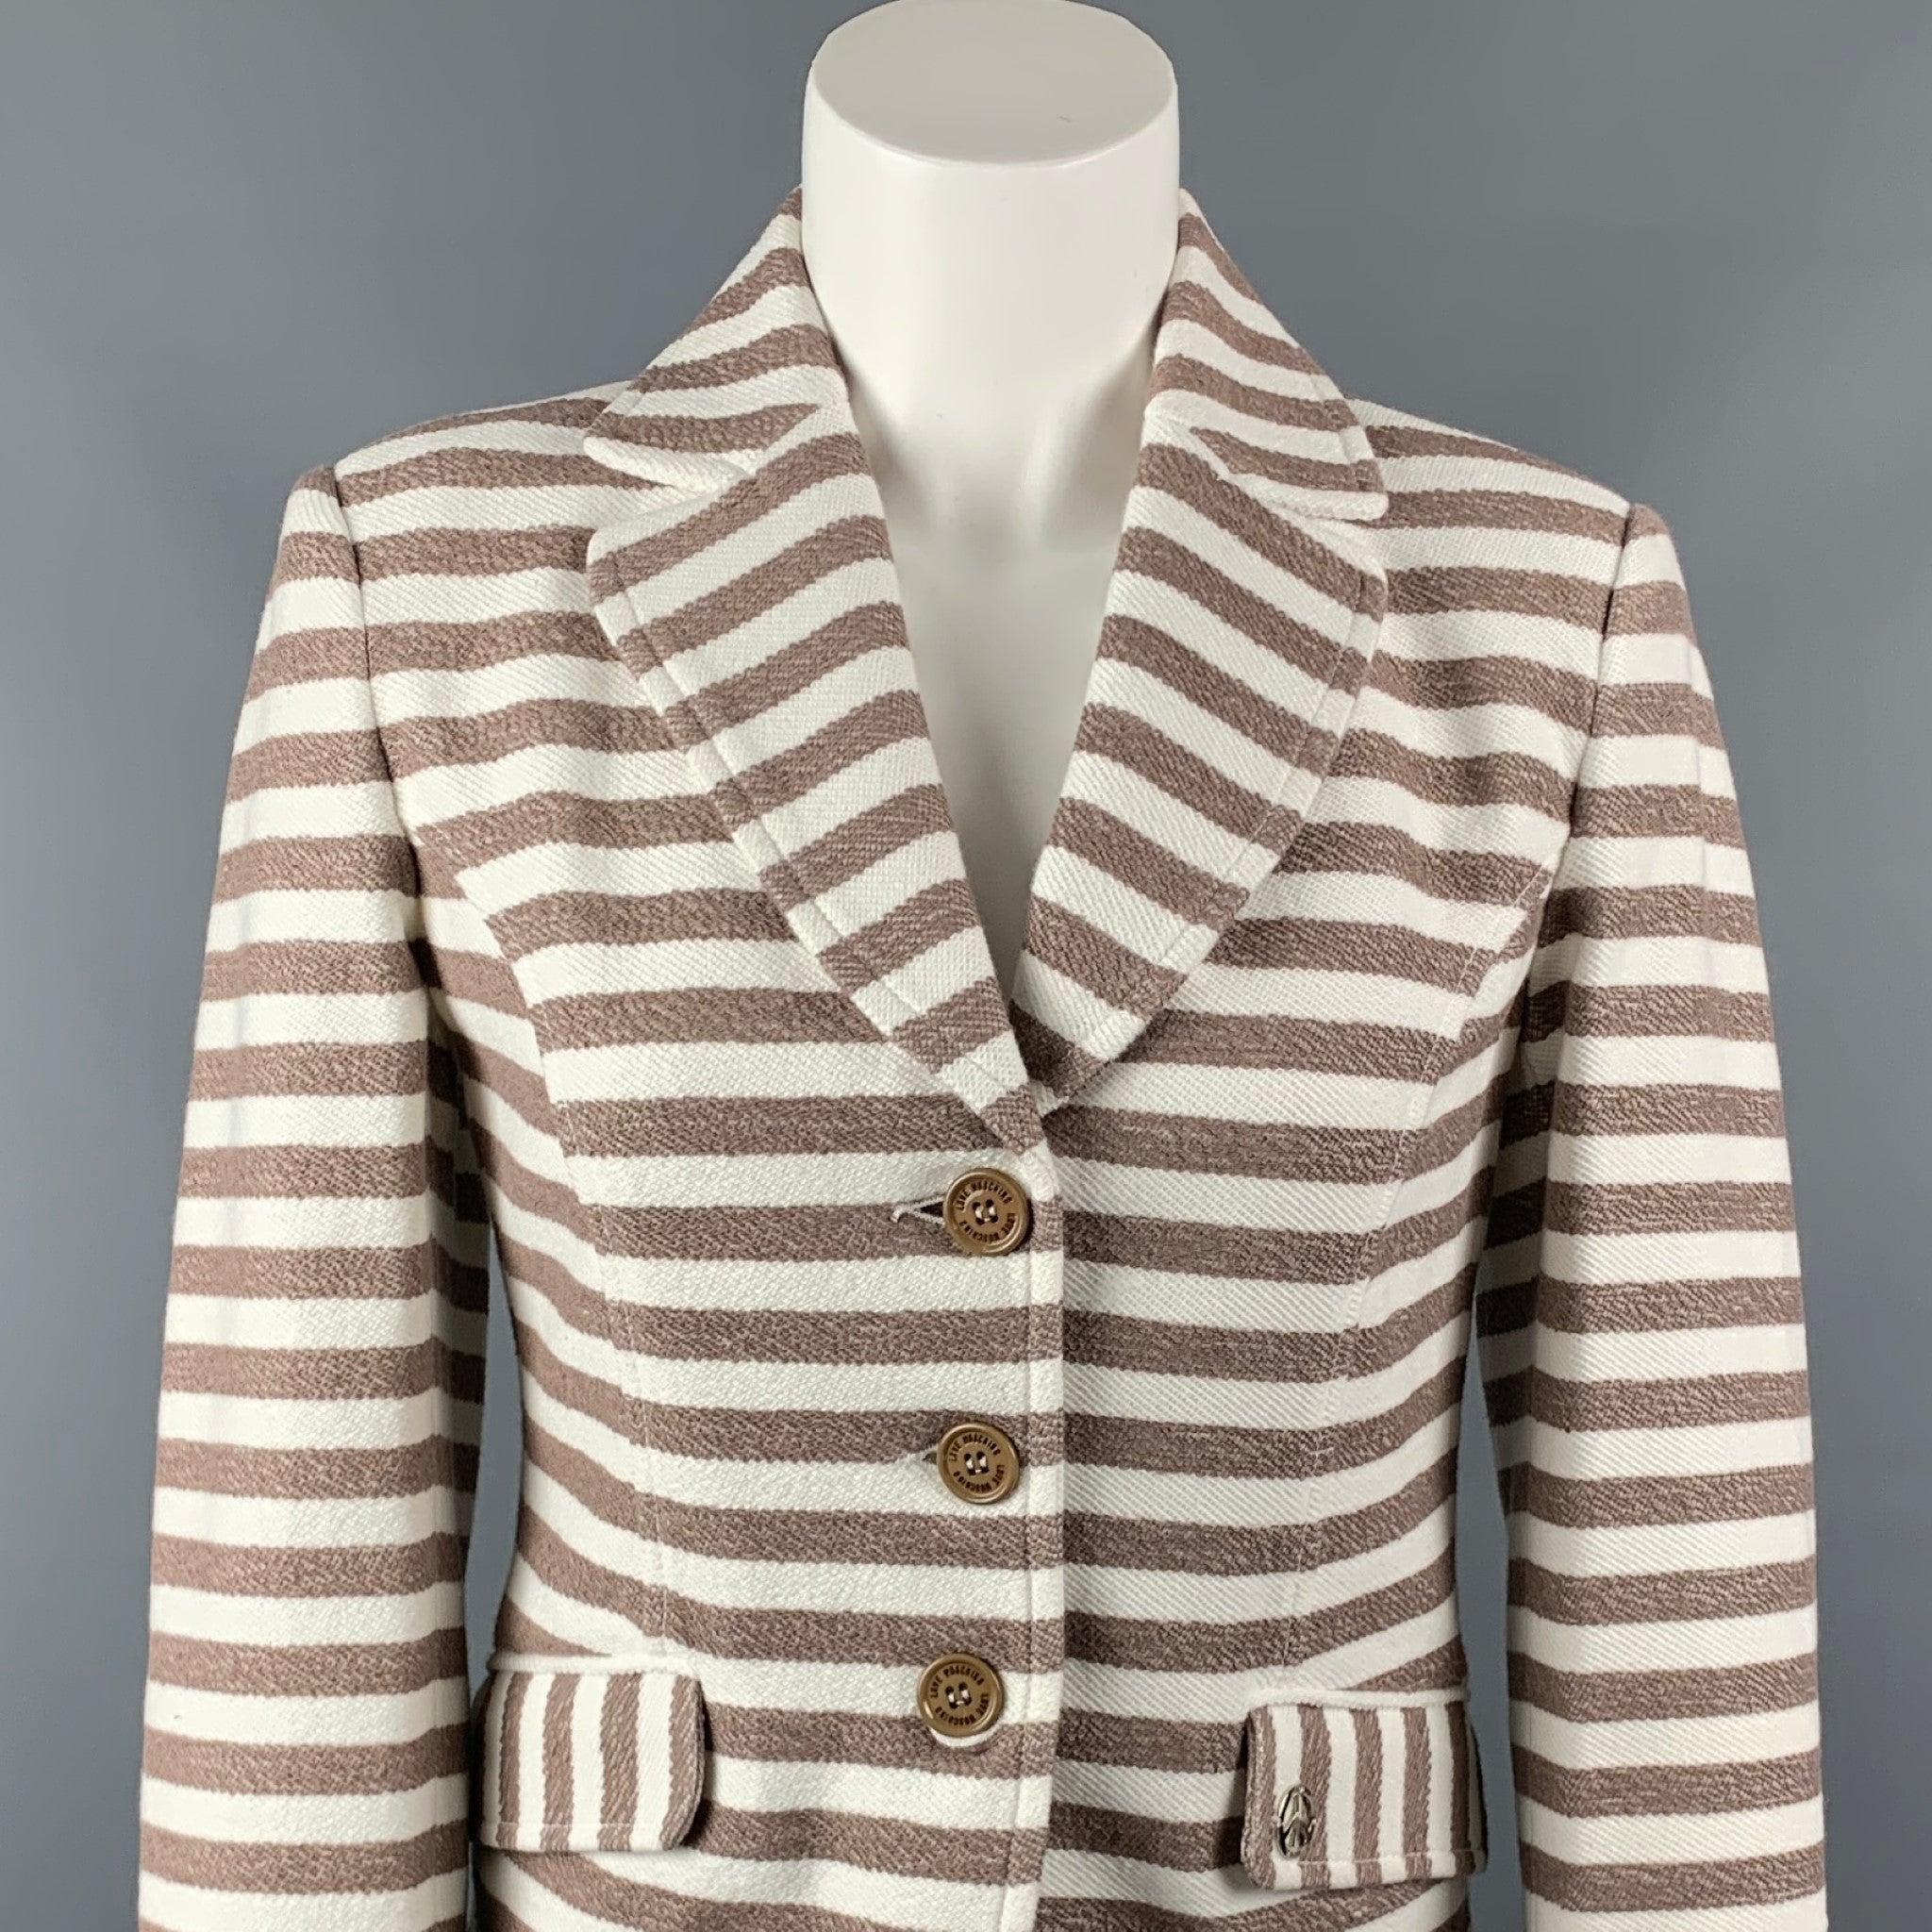 LOVE MOSCHINO jacket comes in a cream & taupe stripe cotton with a full liner featuring a notch lapel, flap pockets, silver tone logo, and a three button closure.New With Tags.  

Marked:   D 36 / GB 8 / F 36 / USA 4 / I 40
 
  

Measurements: 
